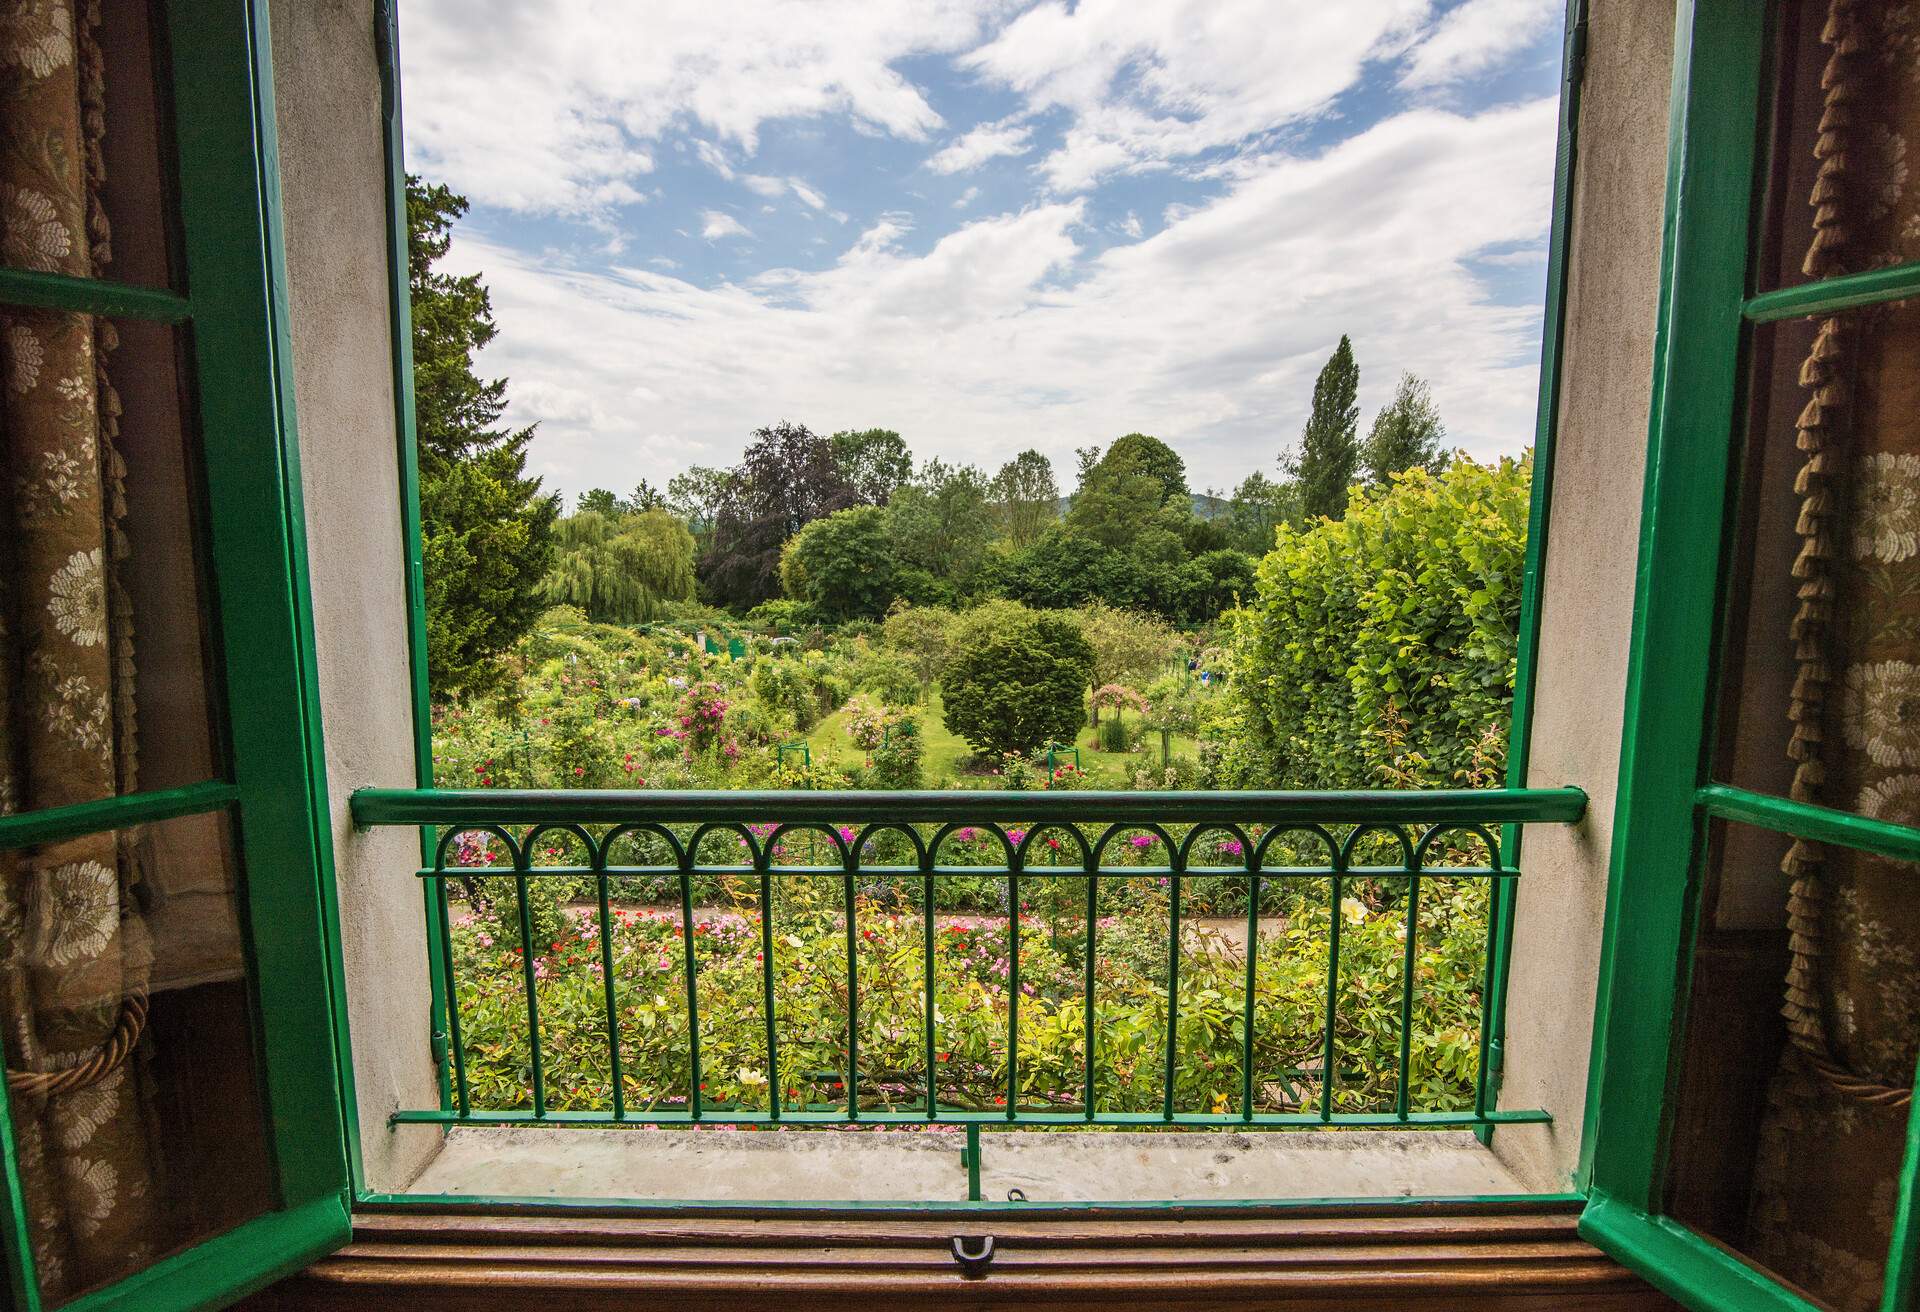 The garden of Claude Monet's house in Giverny, Normandy